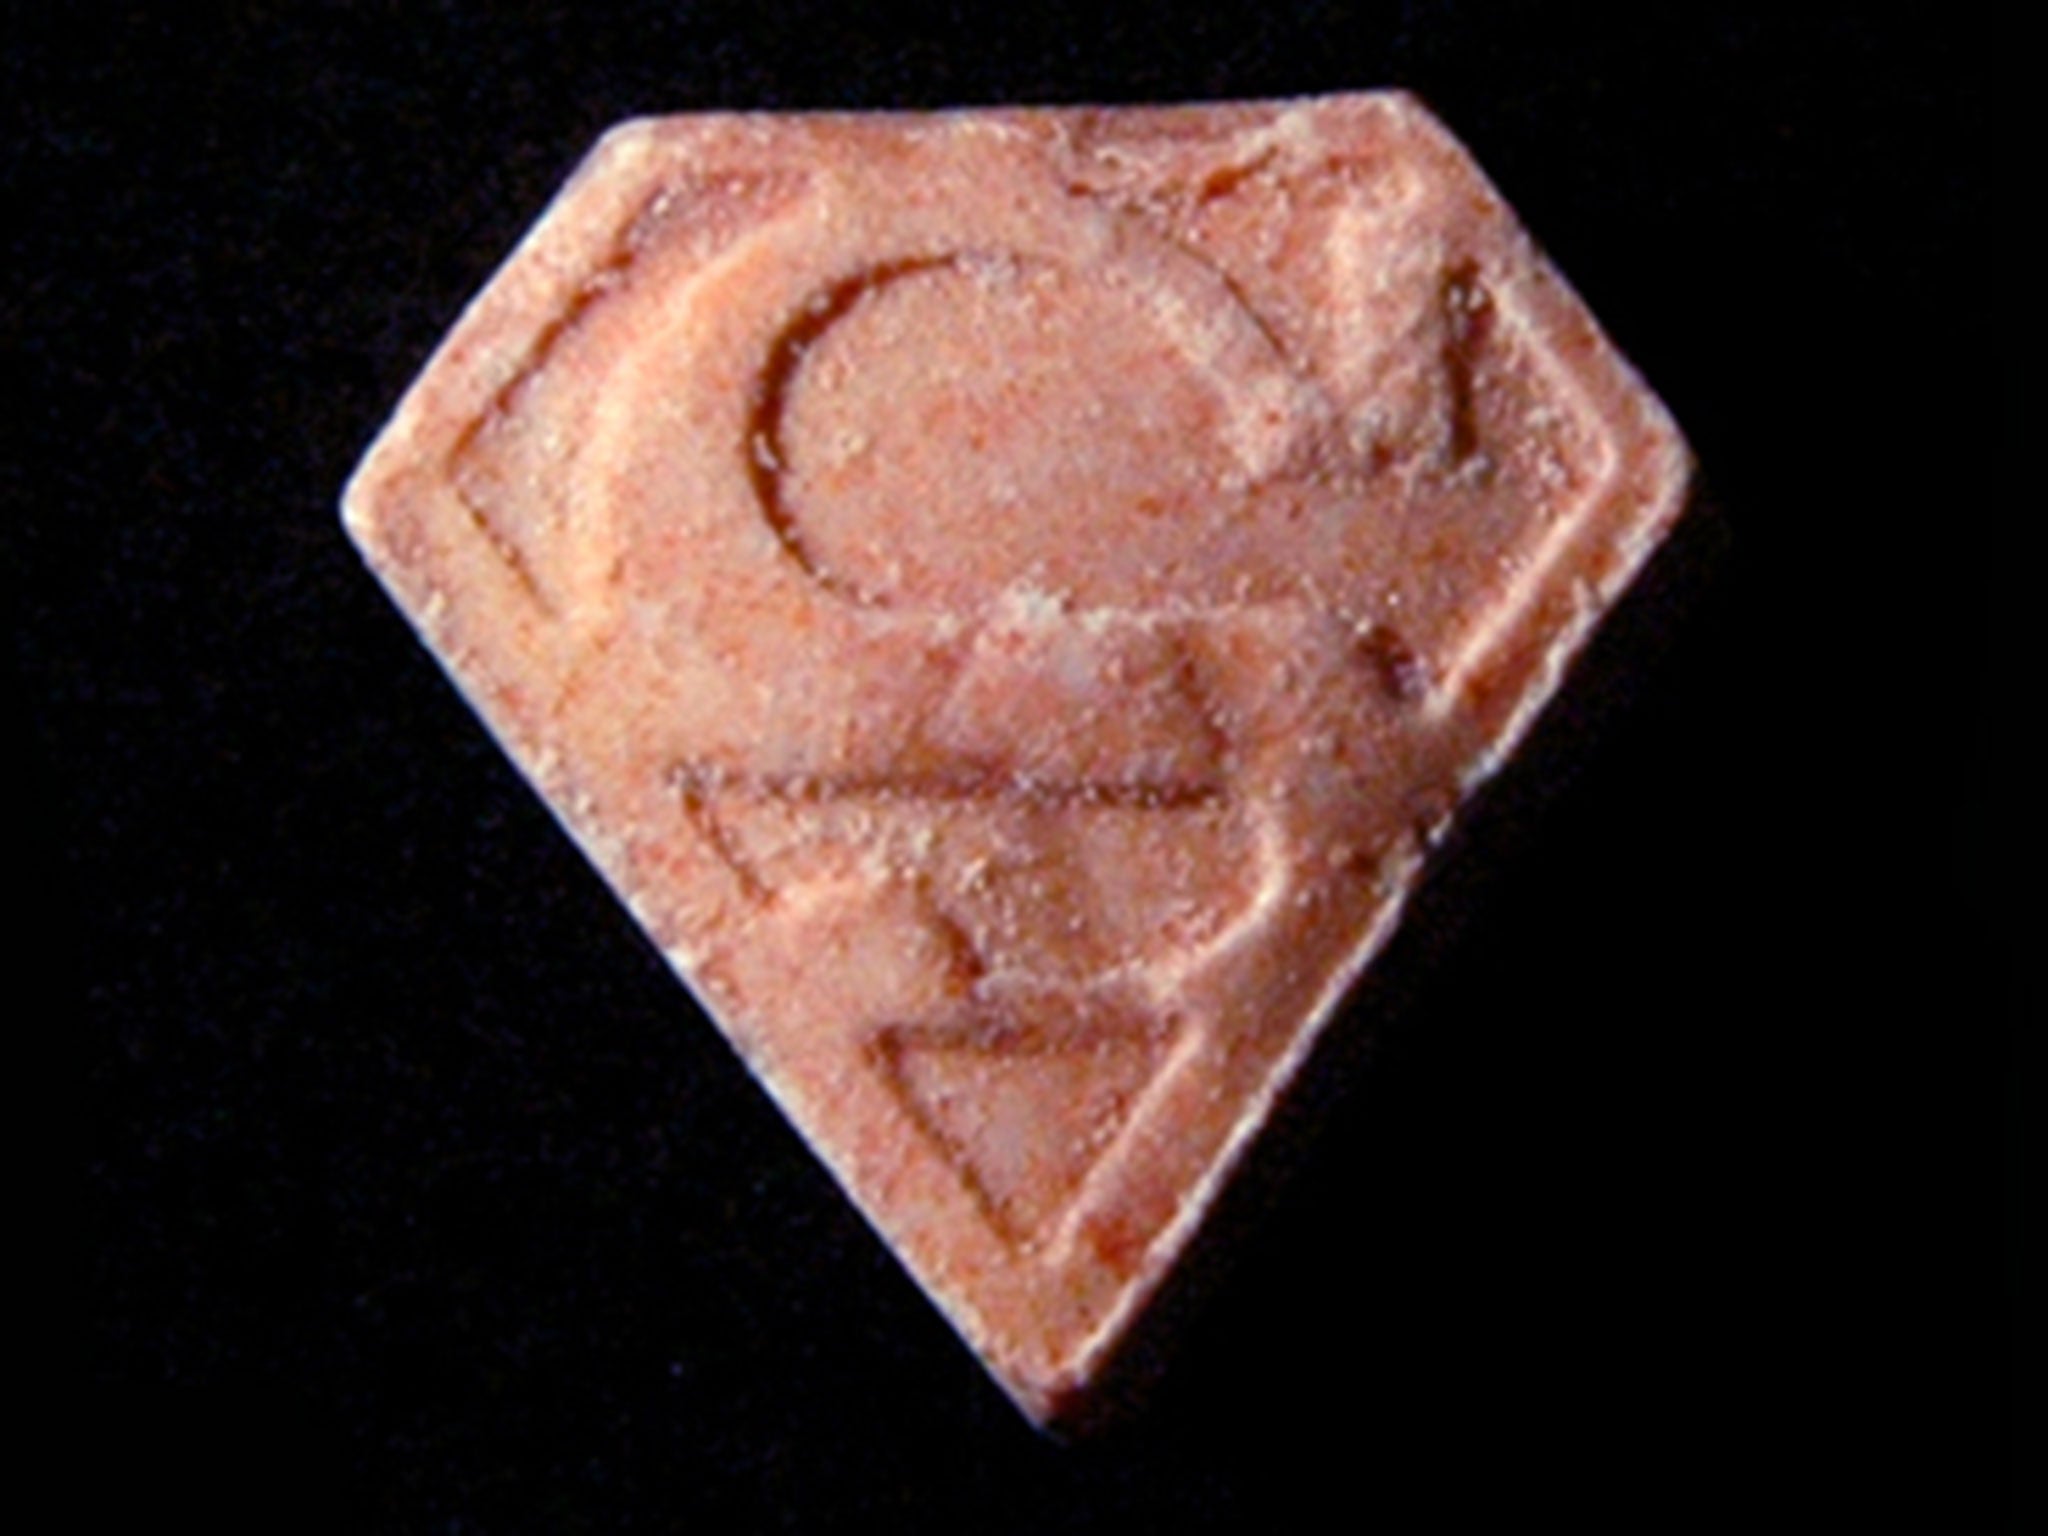 The pills were apparently marked with a 'Superman' logo